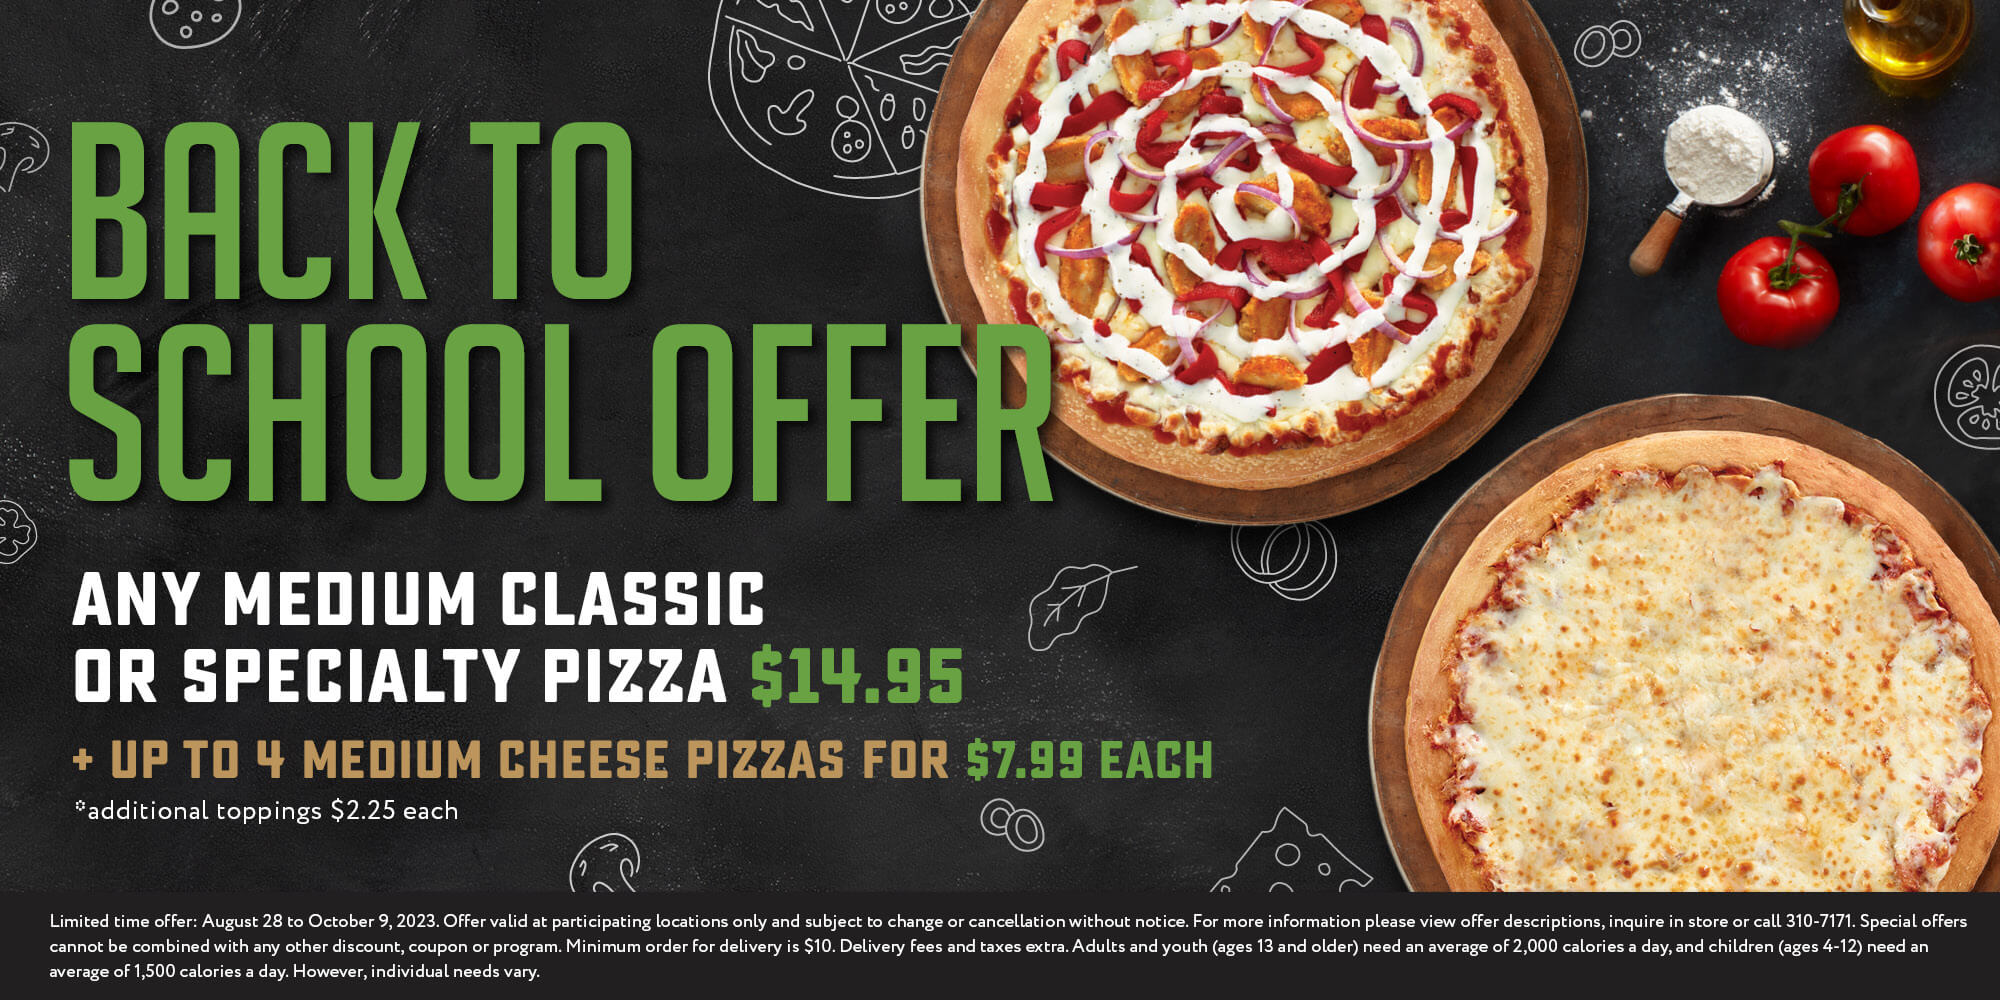 Back To School Offer - Any medium classic or specialty pizza